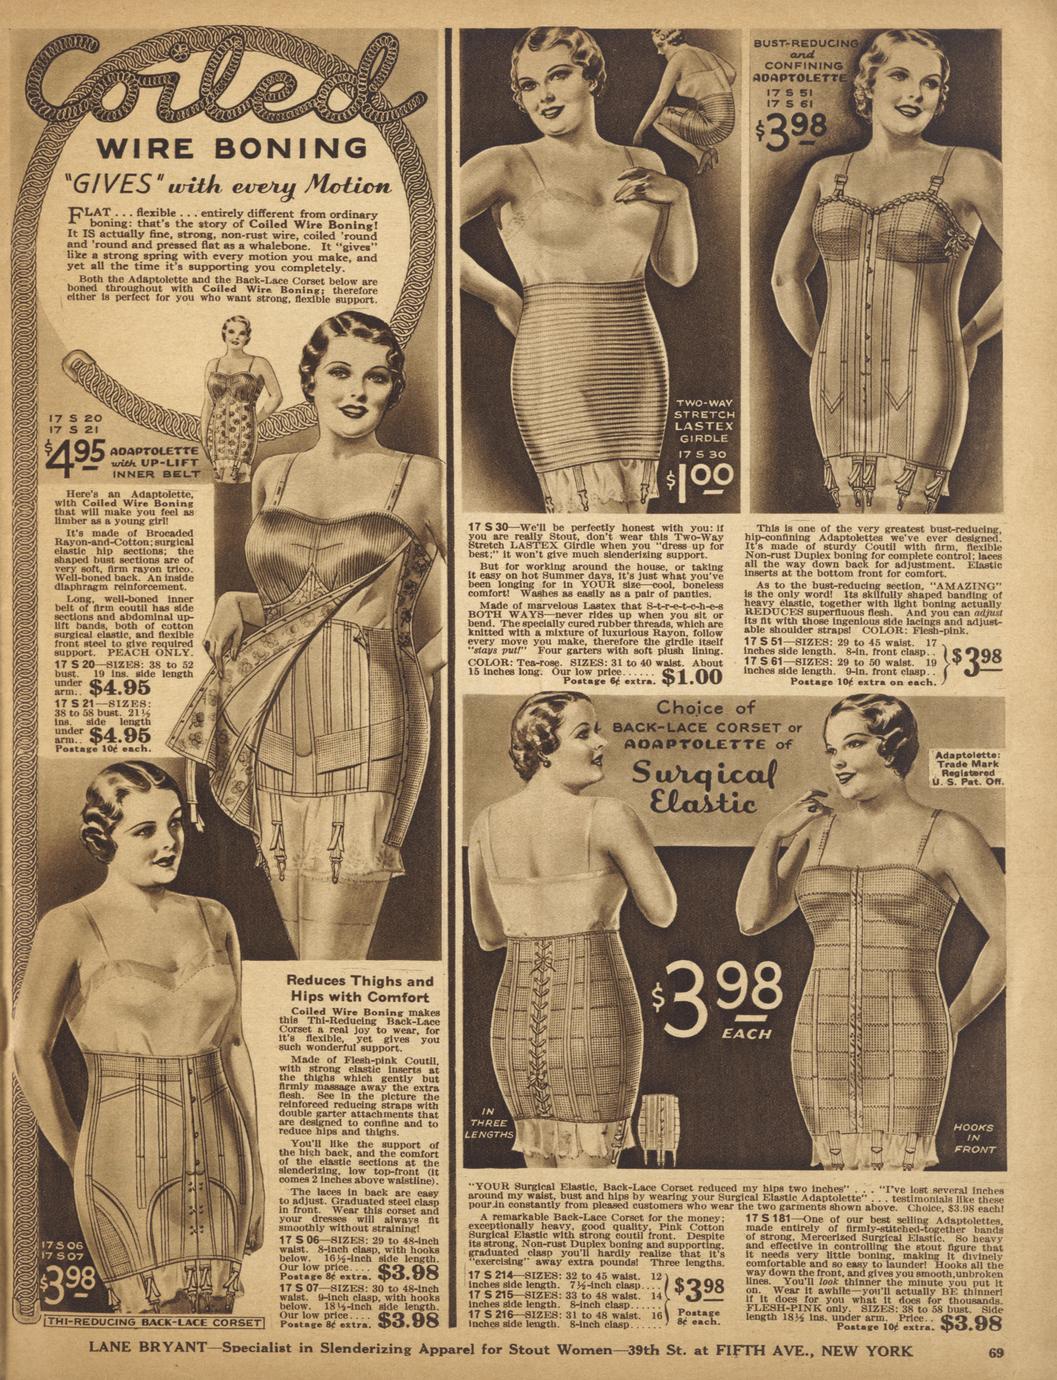 The style book of slenderizing fashions : spring and summer 1935 - Full  view - UWDC - UW-Madison Libraries